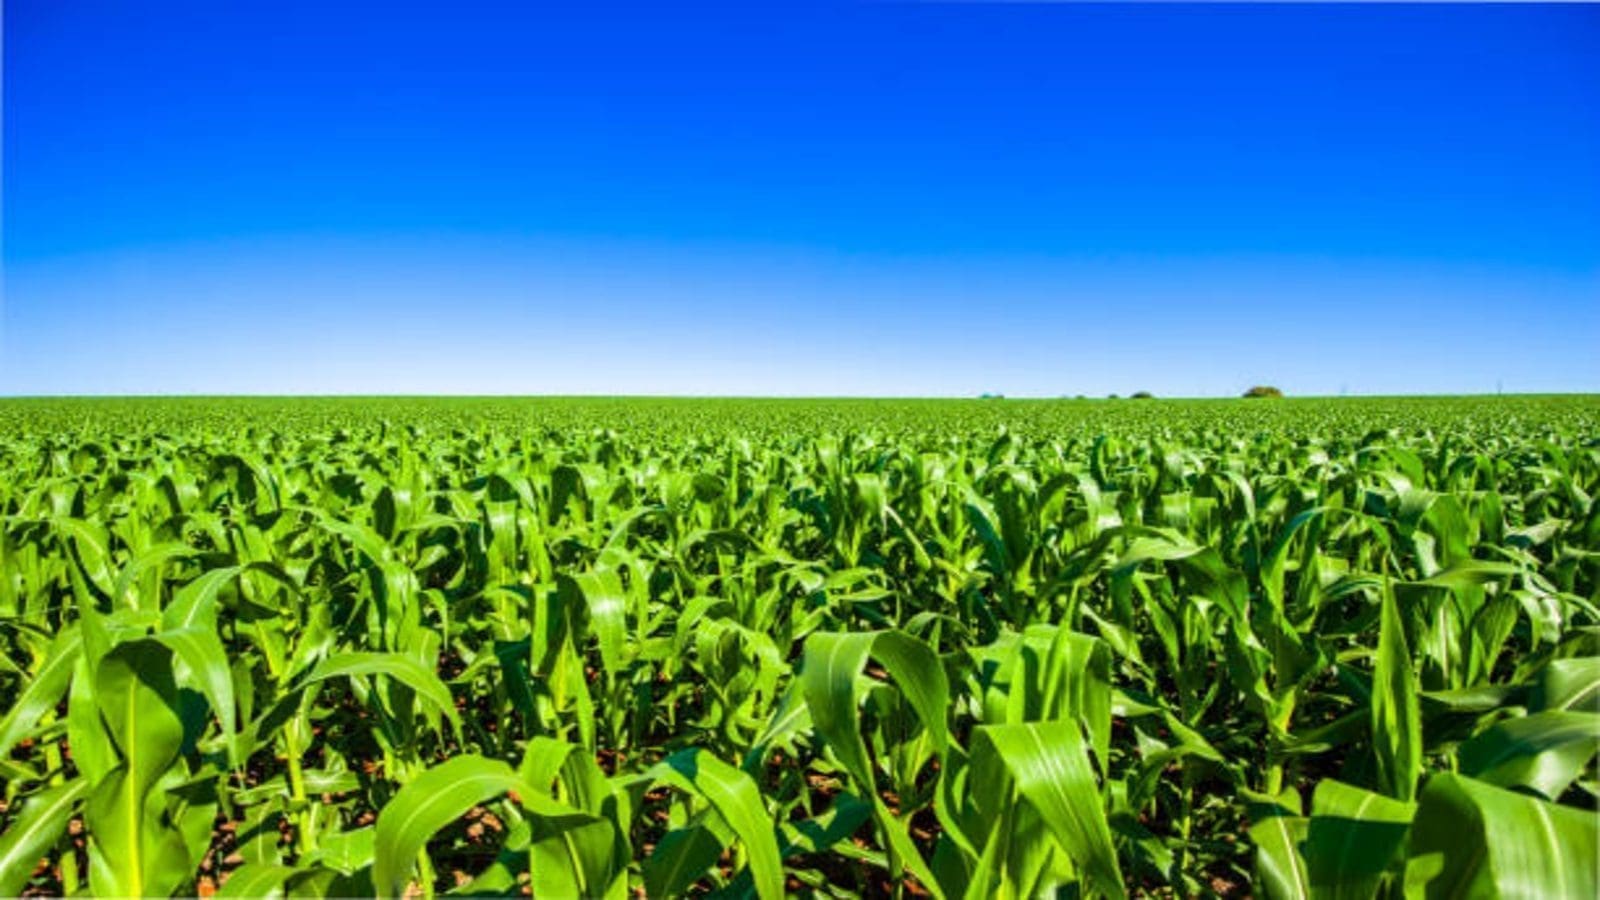 Nigeria aims to increase maize production to 10MT per hectare by 2025